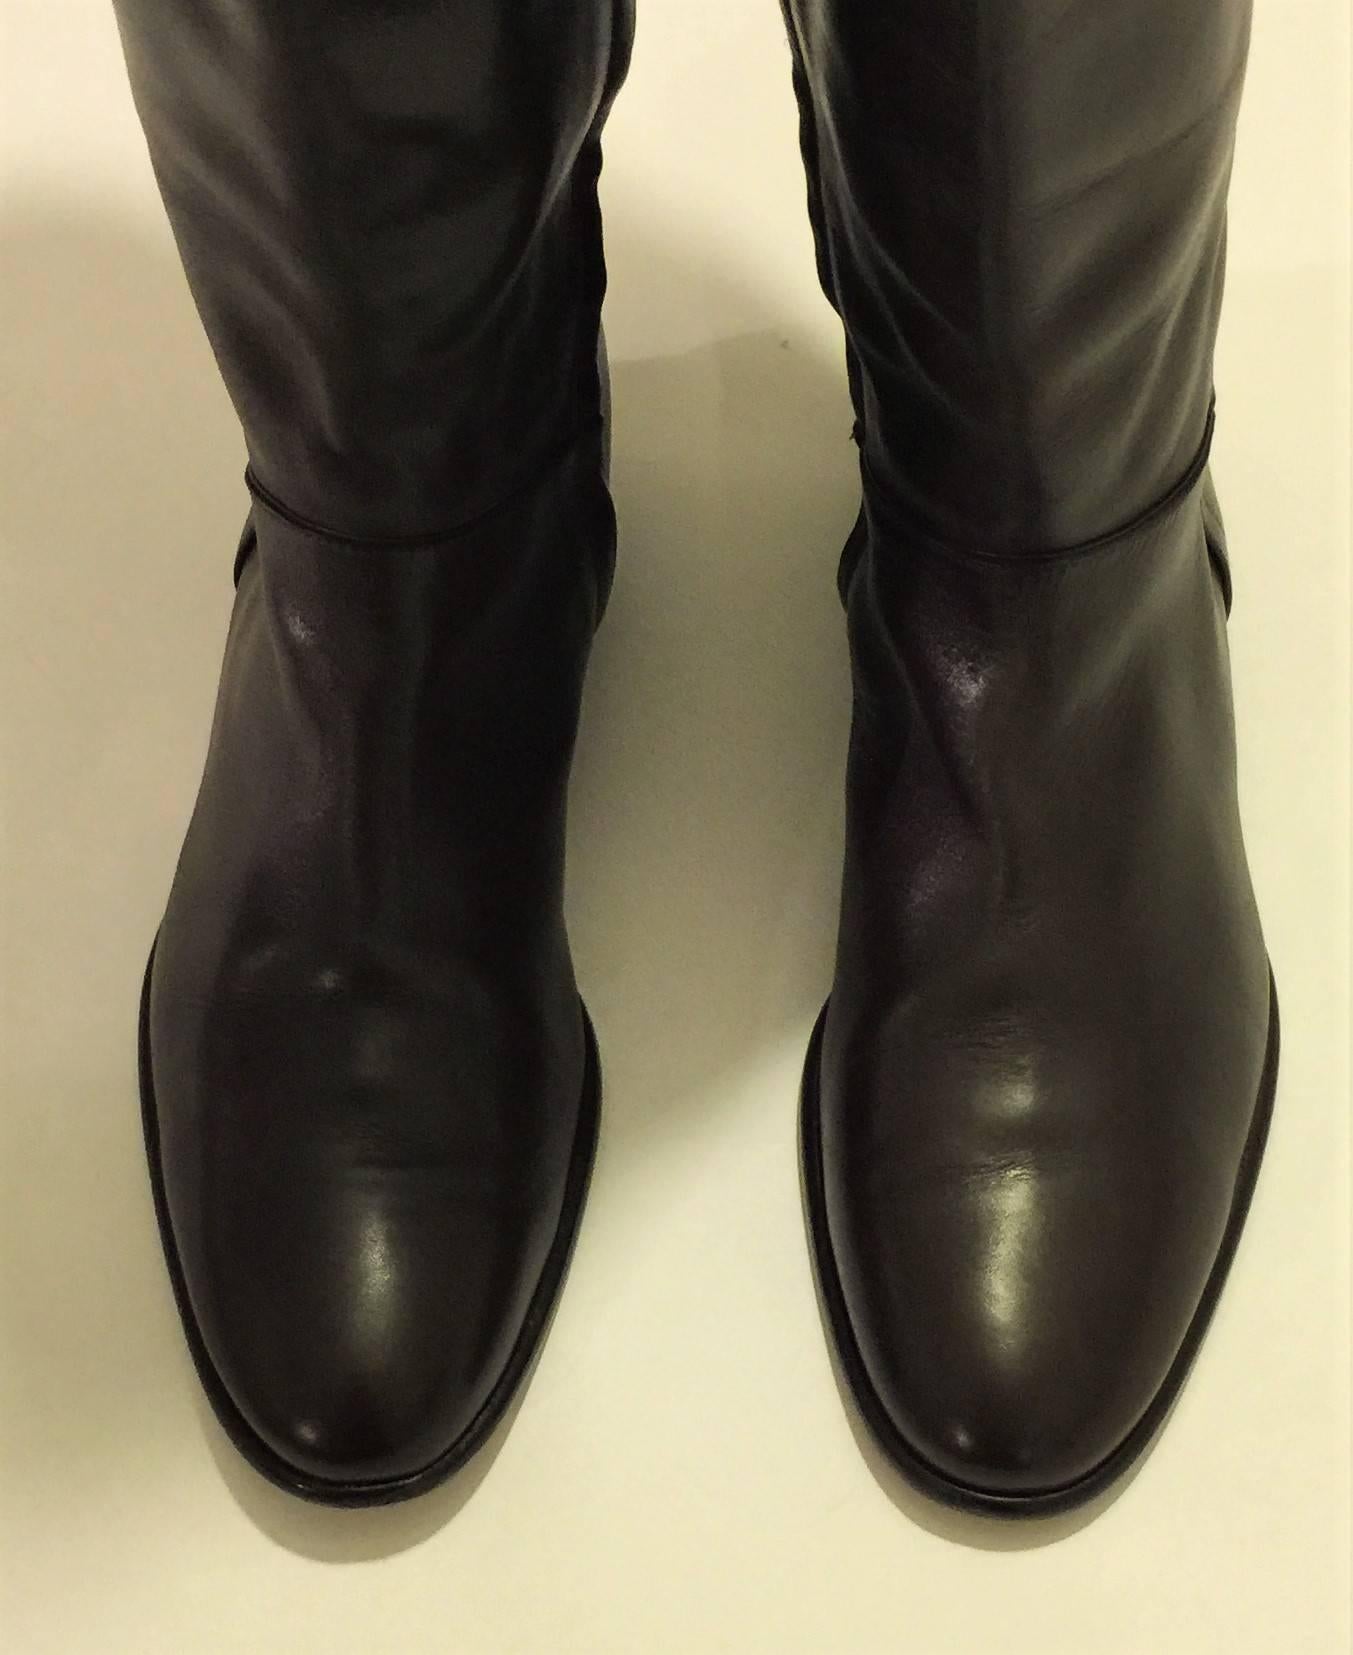 Women's Loro Piana Iconic hand-made 100% Leather Knee High with turn-back Cuff Boots.  